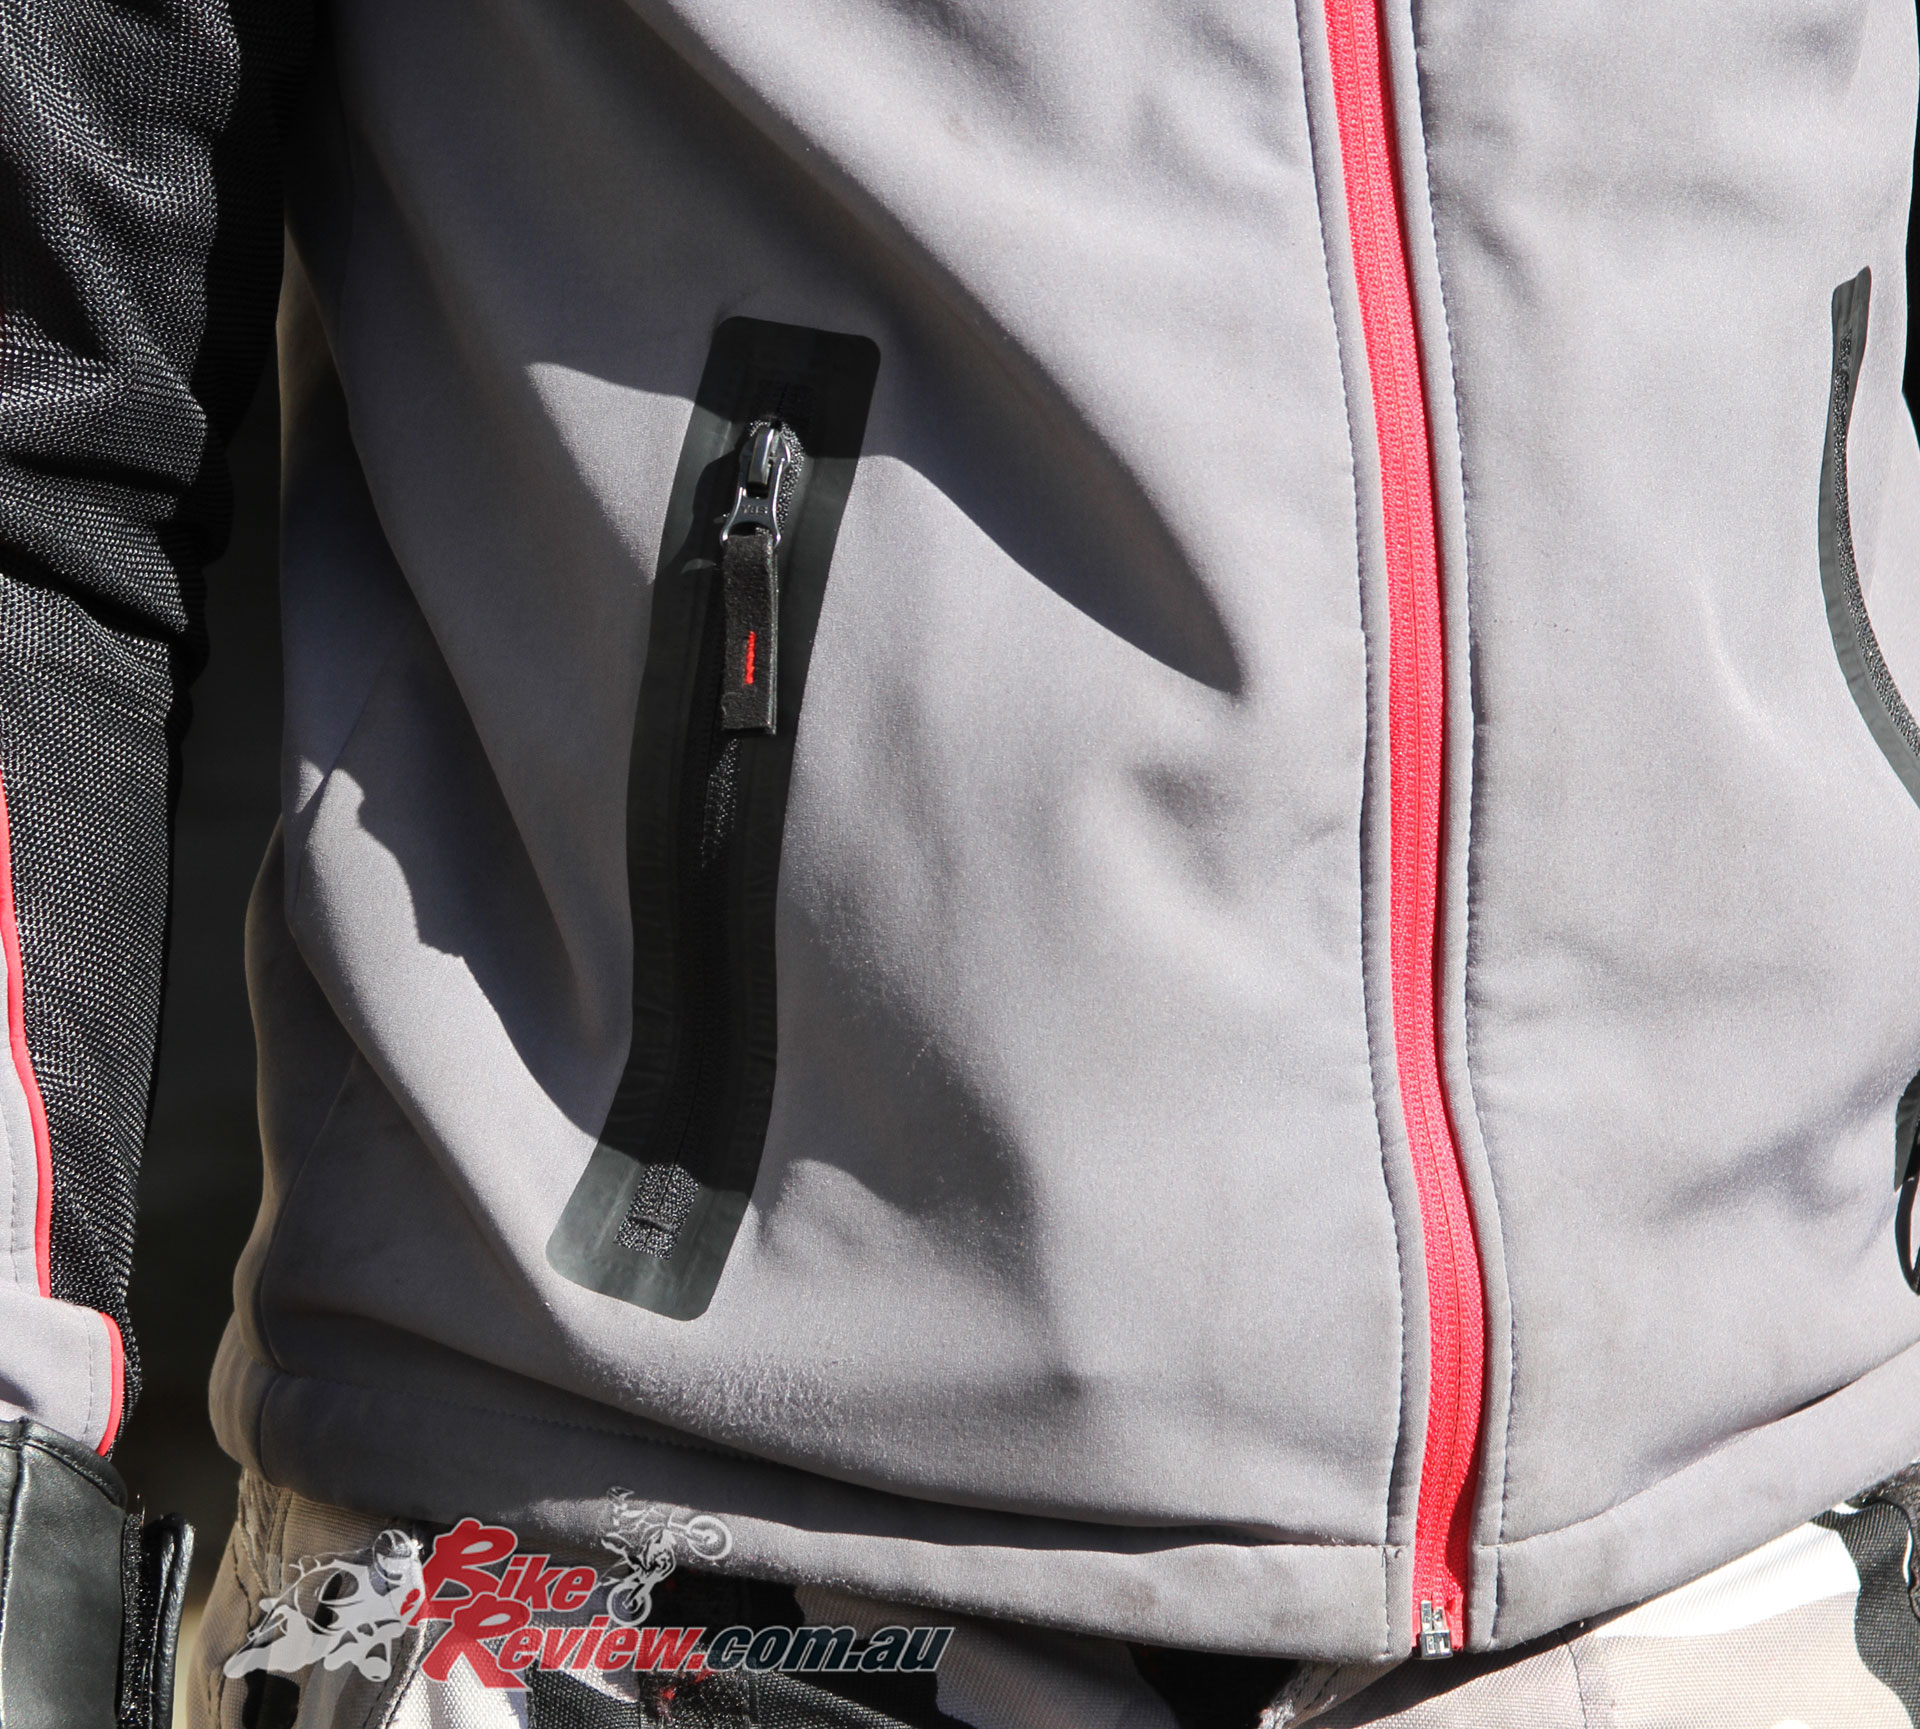 DriRider Atomic Hoodie - Outer pockets offer room for a wallet or phone